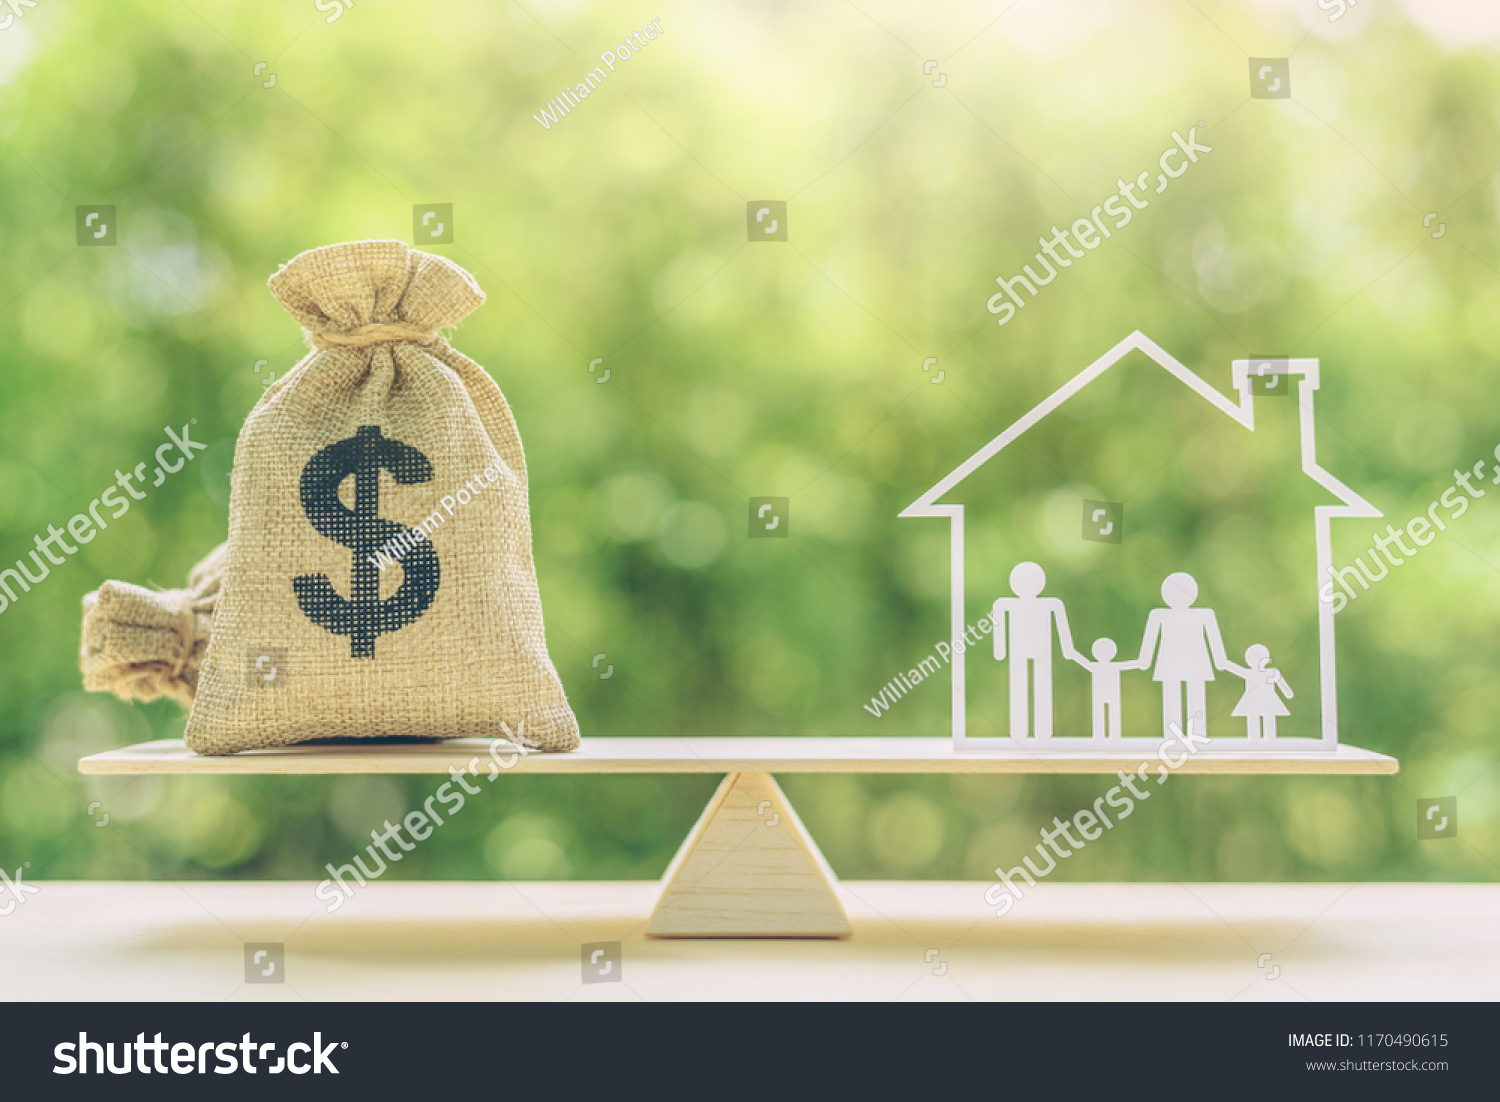 Cost of living, home loan, family finance and child trust fund concept : US dollar bags, family members live inside a house on basic balance scale, depicts the expenditure a family should prepare for #1170490615